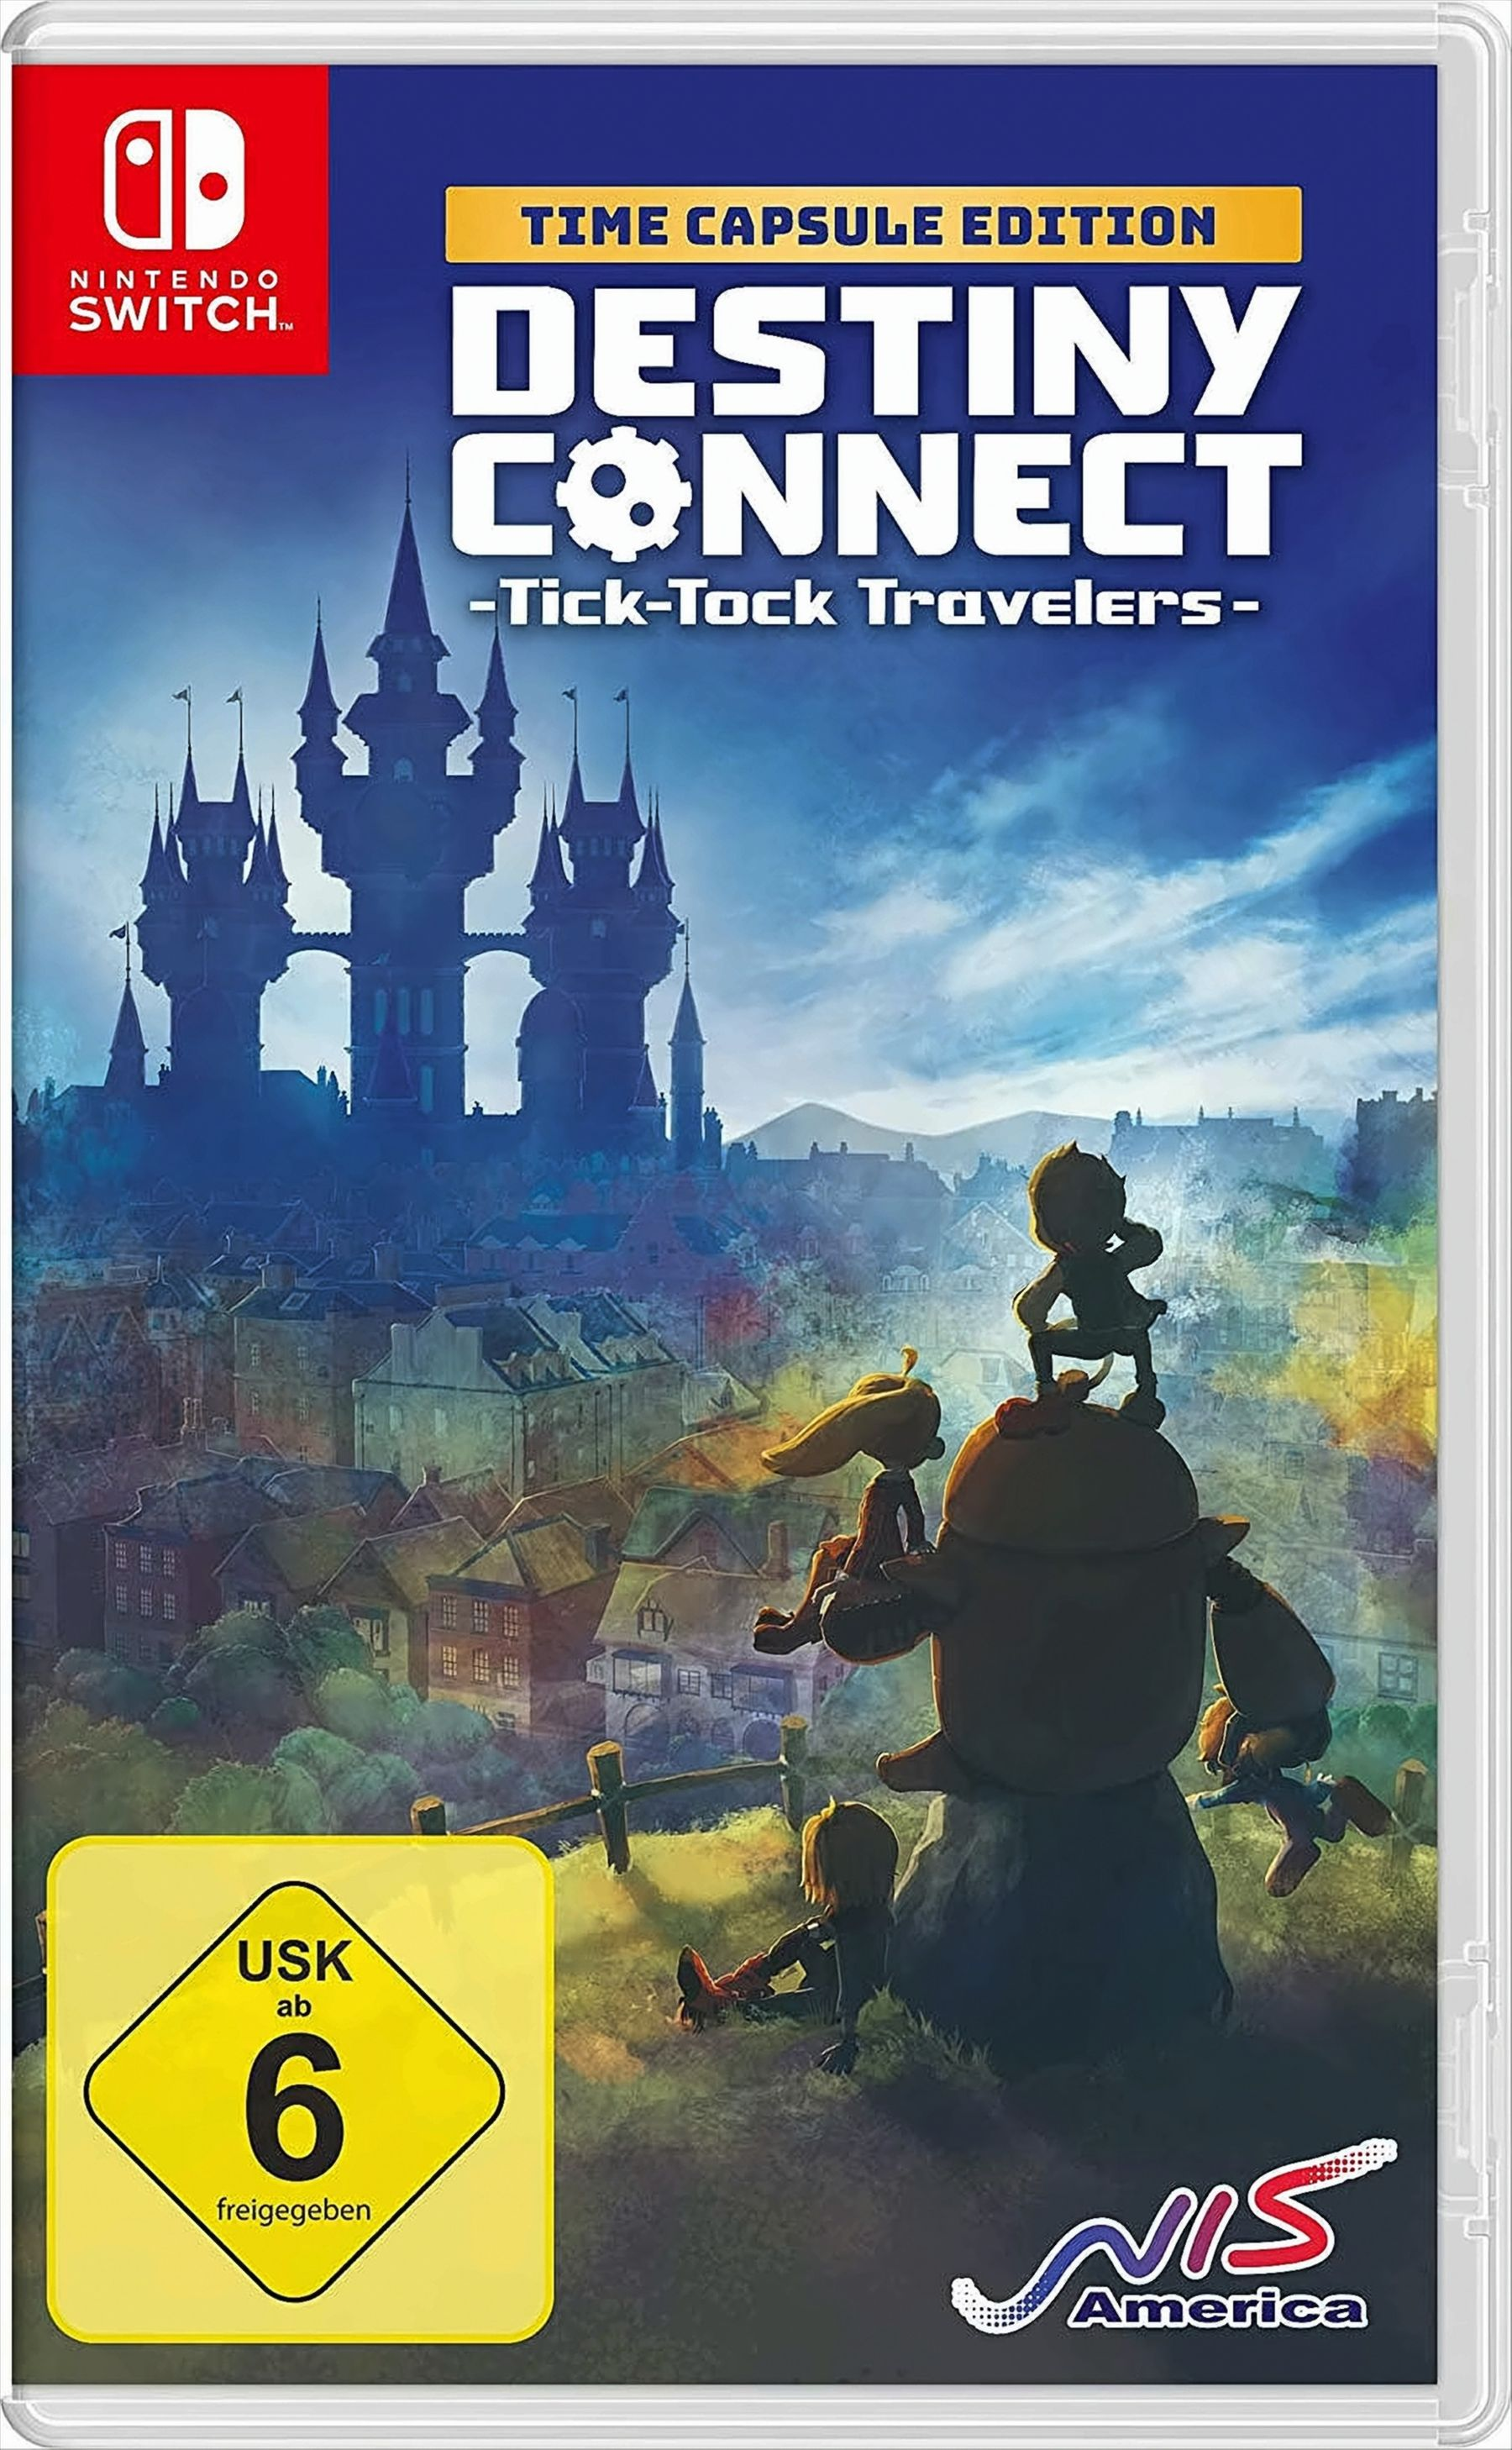 Connect: [Nintendo Tick-Tock Time - Destiny (Switch) Switch] - Capsule Travelers Edition